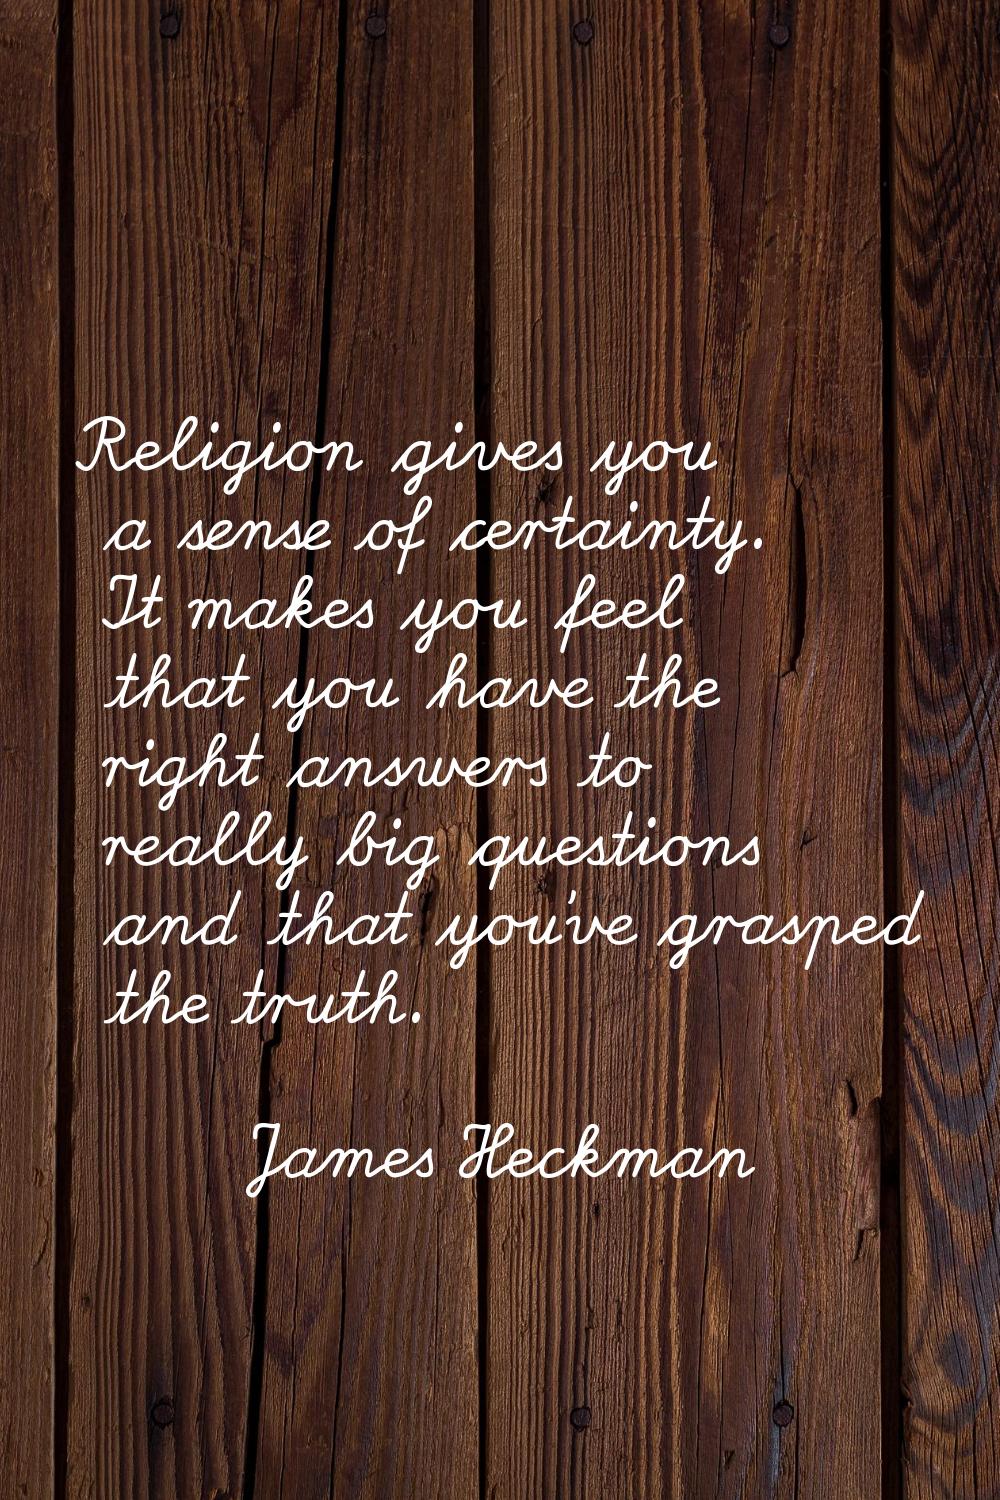 Religion gives you a sense of certainty. It makes you feel that you have the right answers to reall